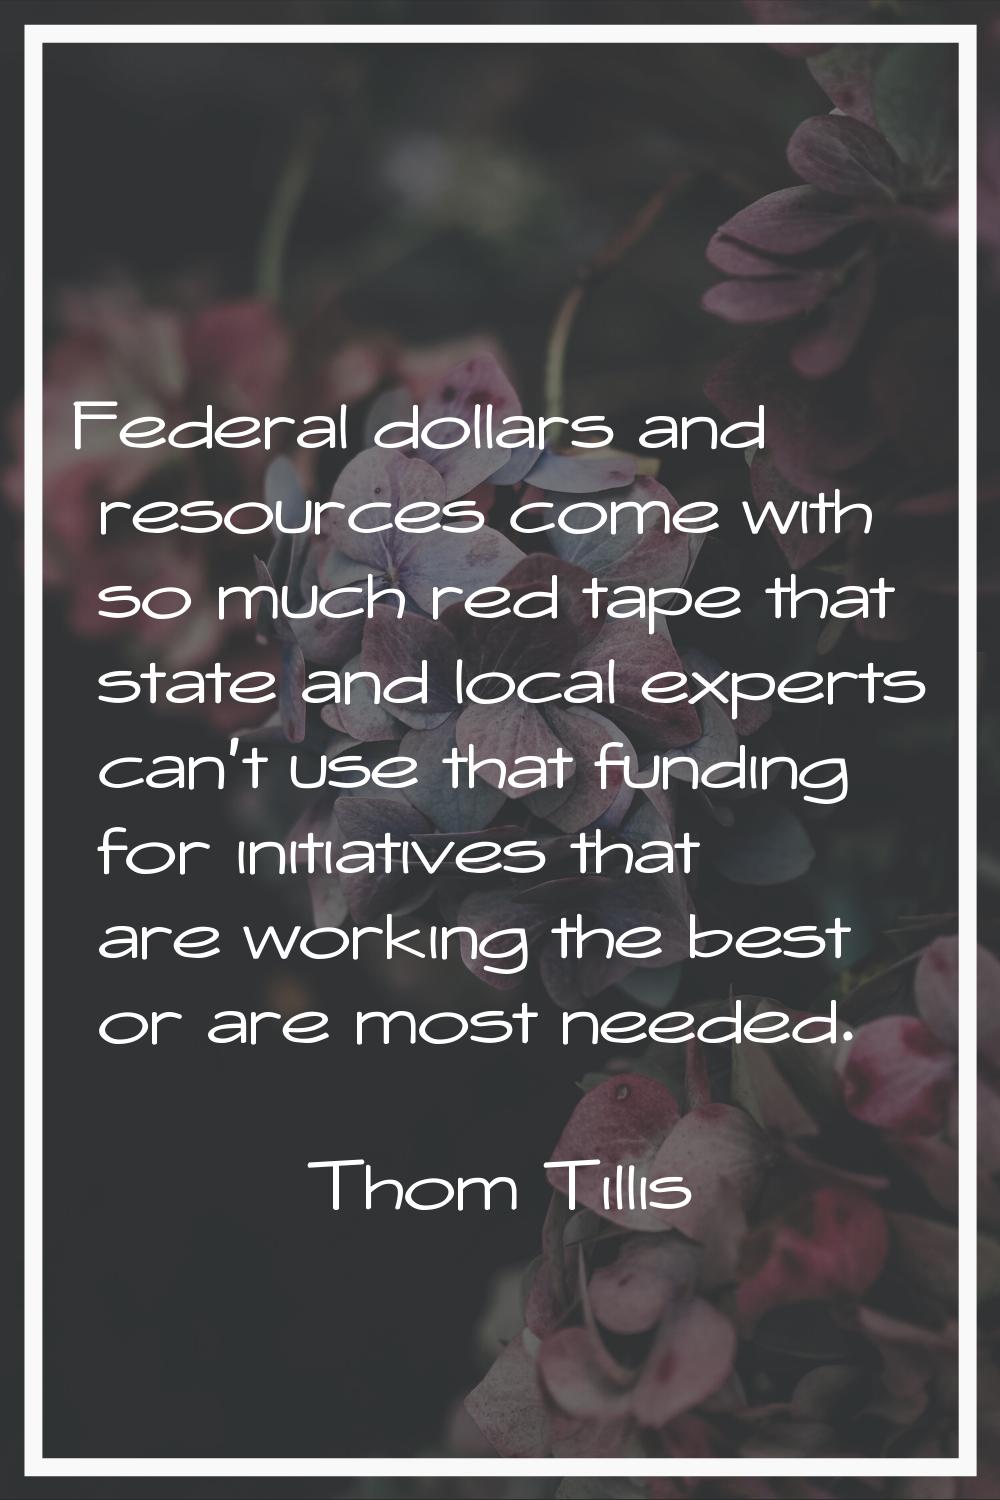 Federal dollars and resources come with so much red tape that state and local experts can't use tha